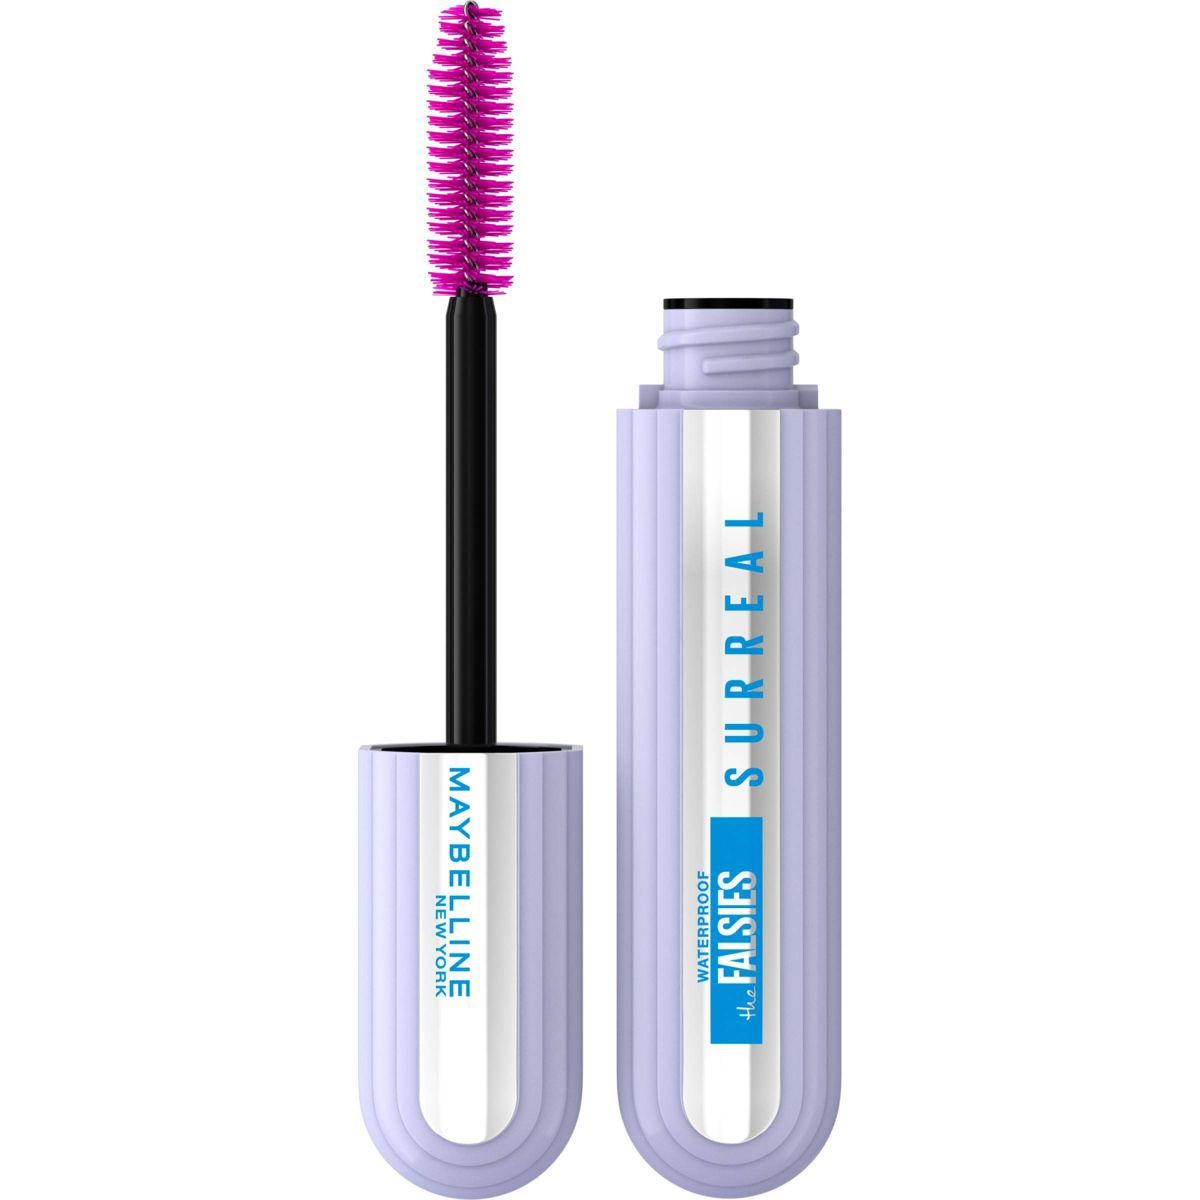 Maybelline The Falsies Surreal Extensions Mascara - 0.33 fl oz | Target